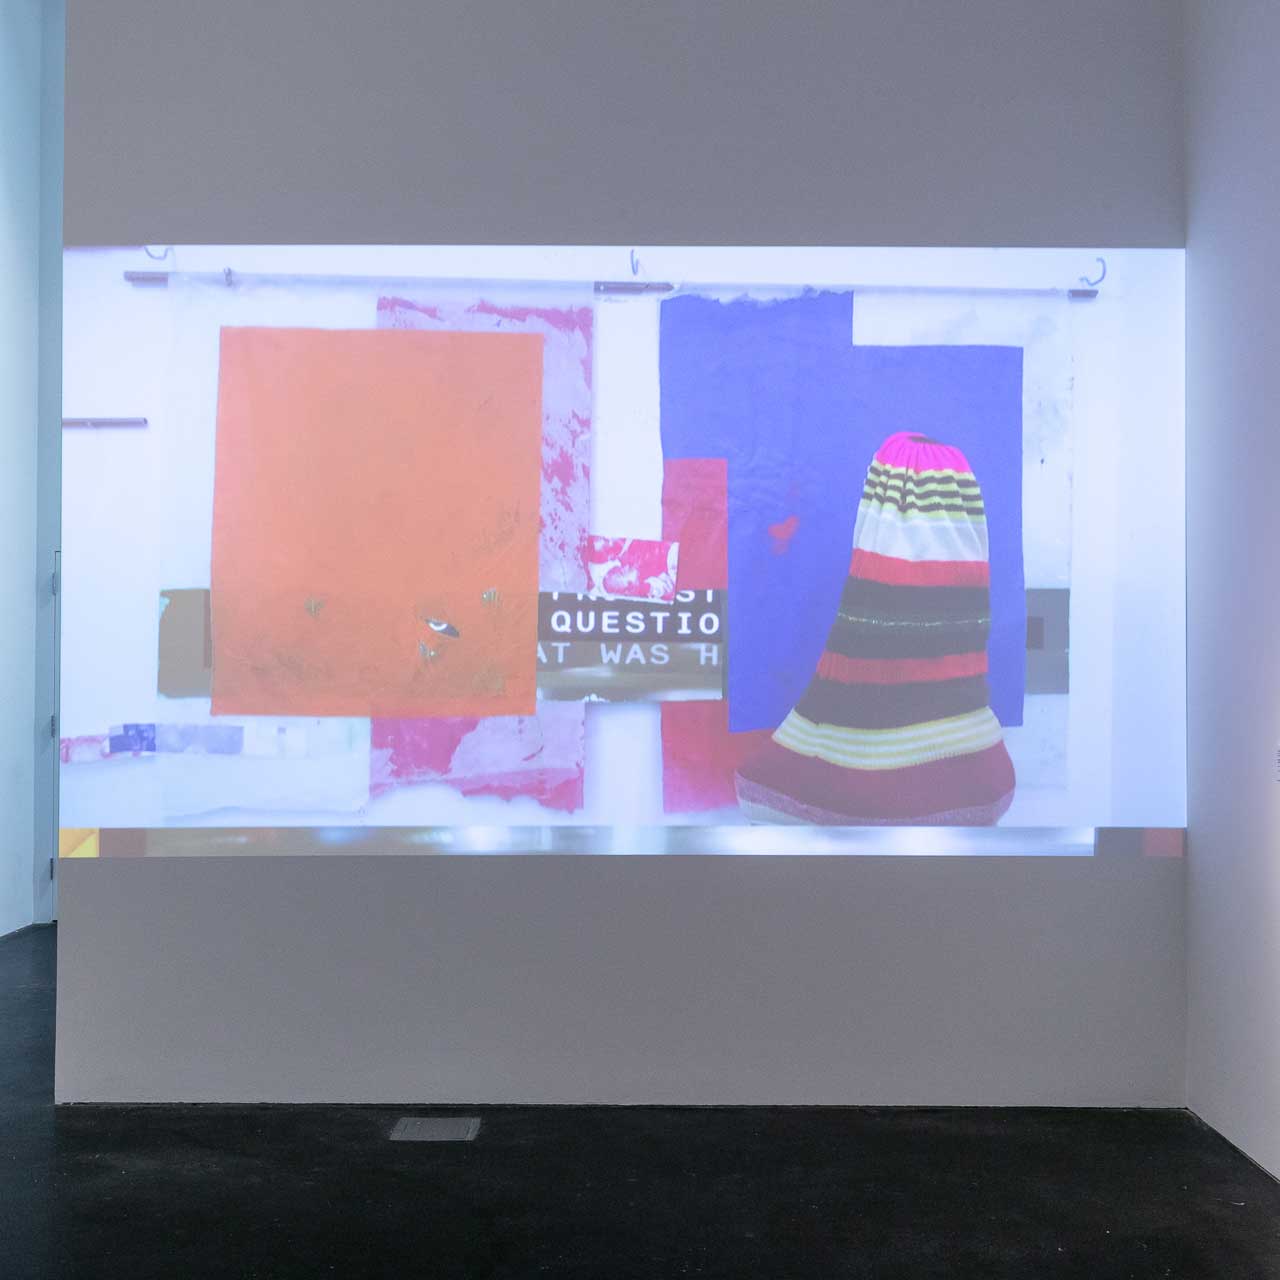 A colorful video projected onto a wall.